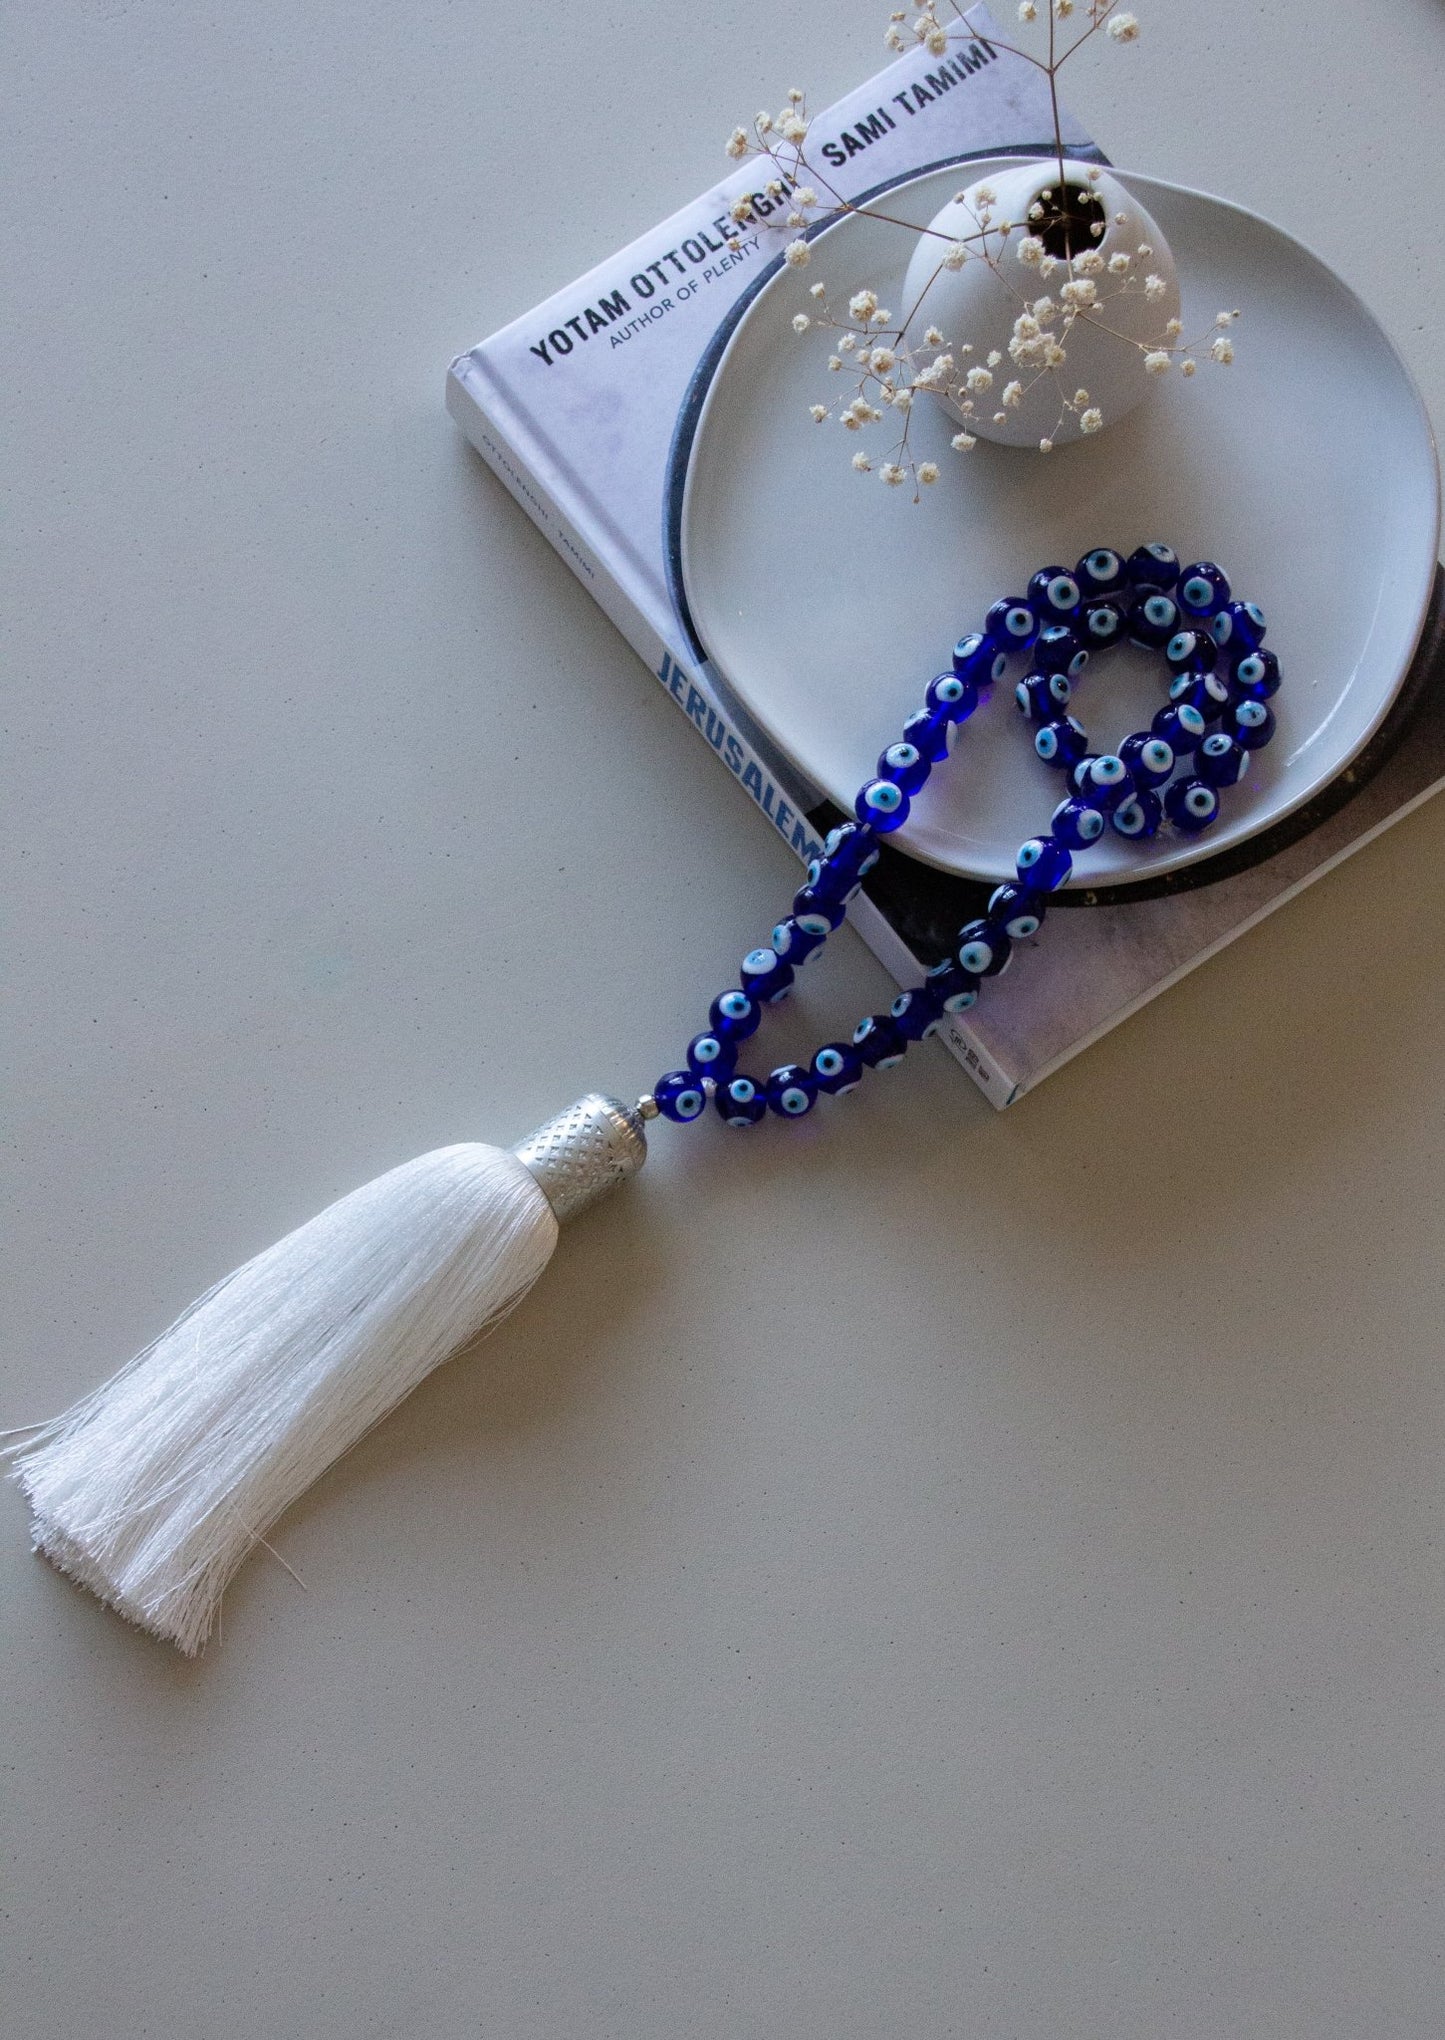 Evil eye Royal blue glass beads home decor necklace with white silk tassel - Stylish Luck Home Decor | Hamsa \ Hand Of Fatima | Good Luck Gifts